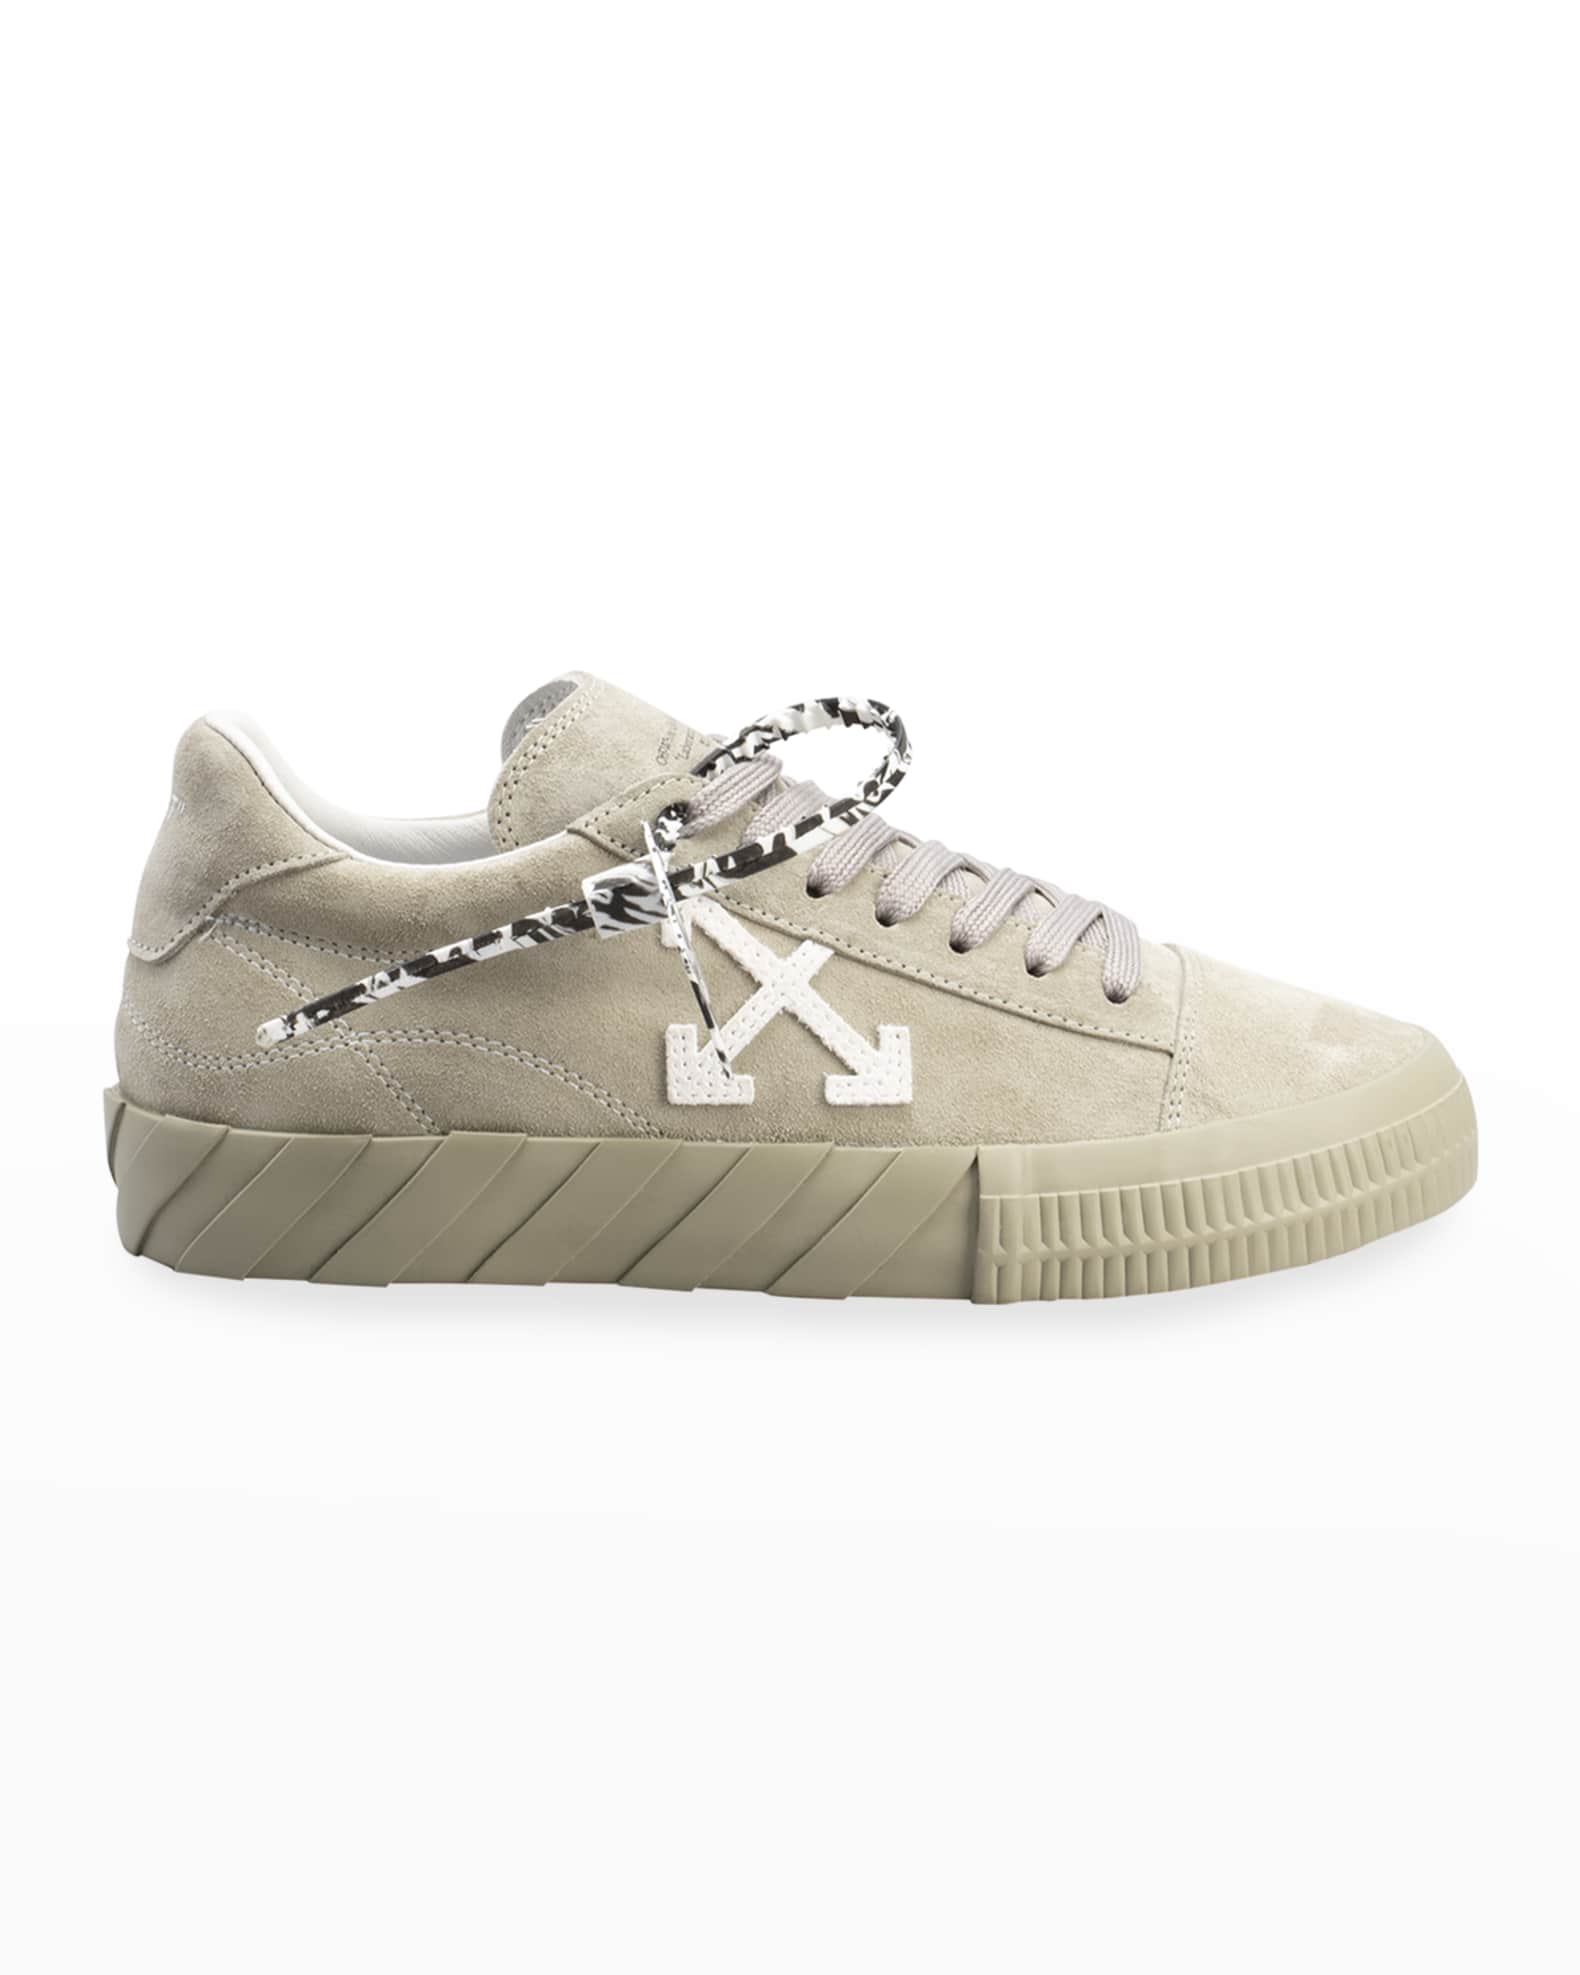 Off-White Arrow Suede Vulcanized Low-Top Sneakers | Neiman Marcus